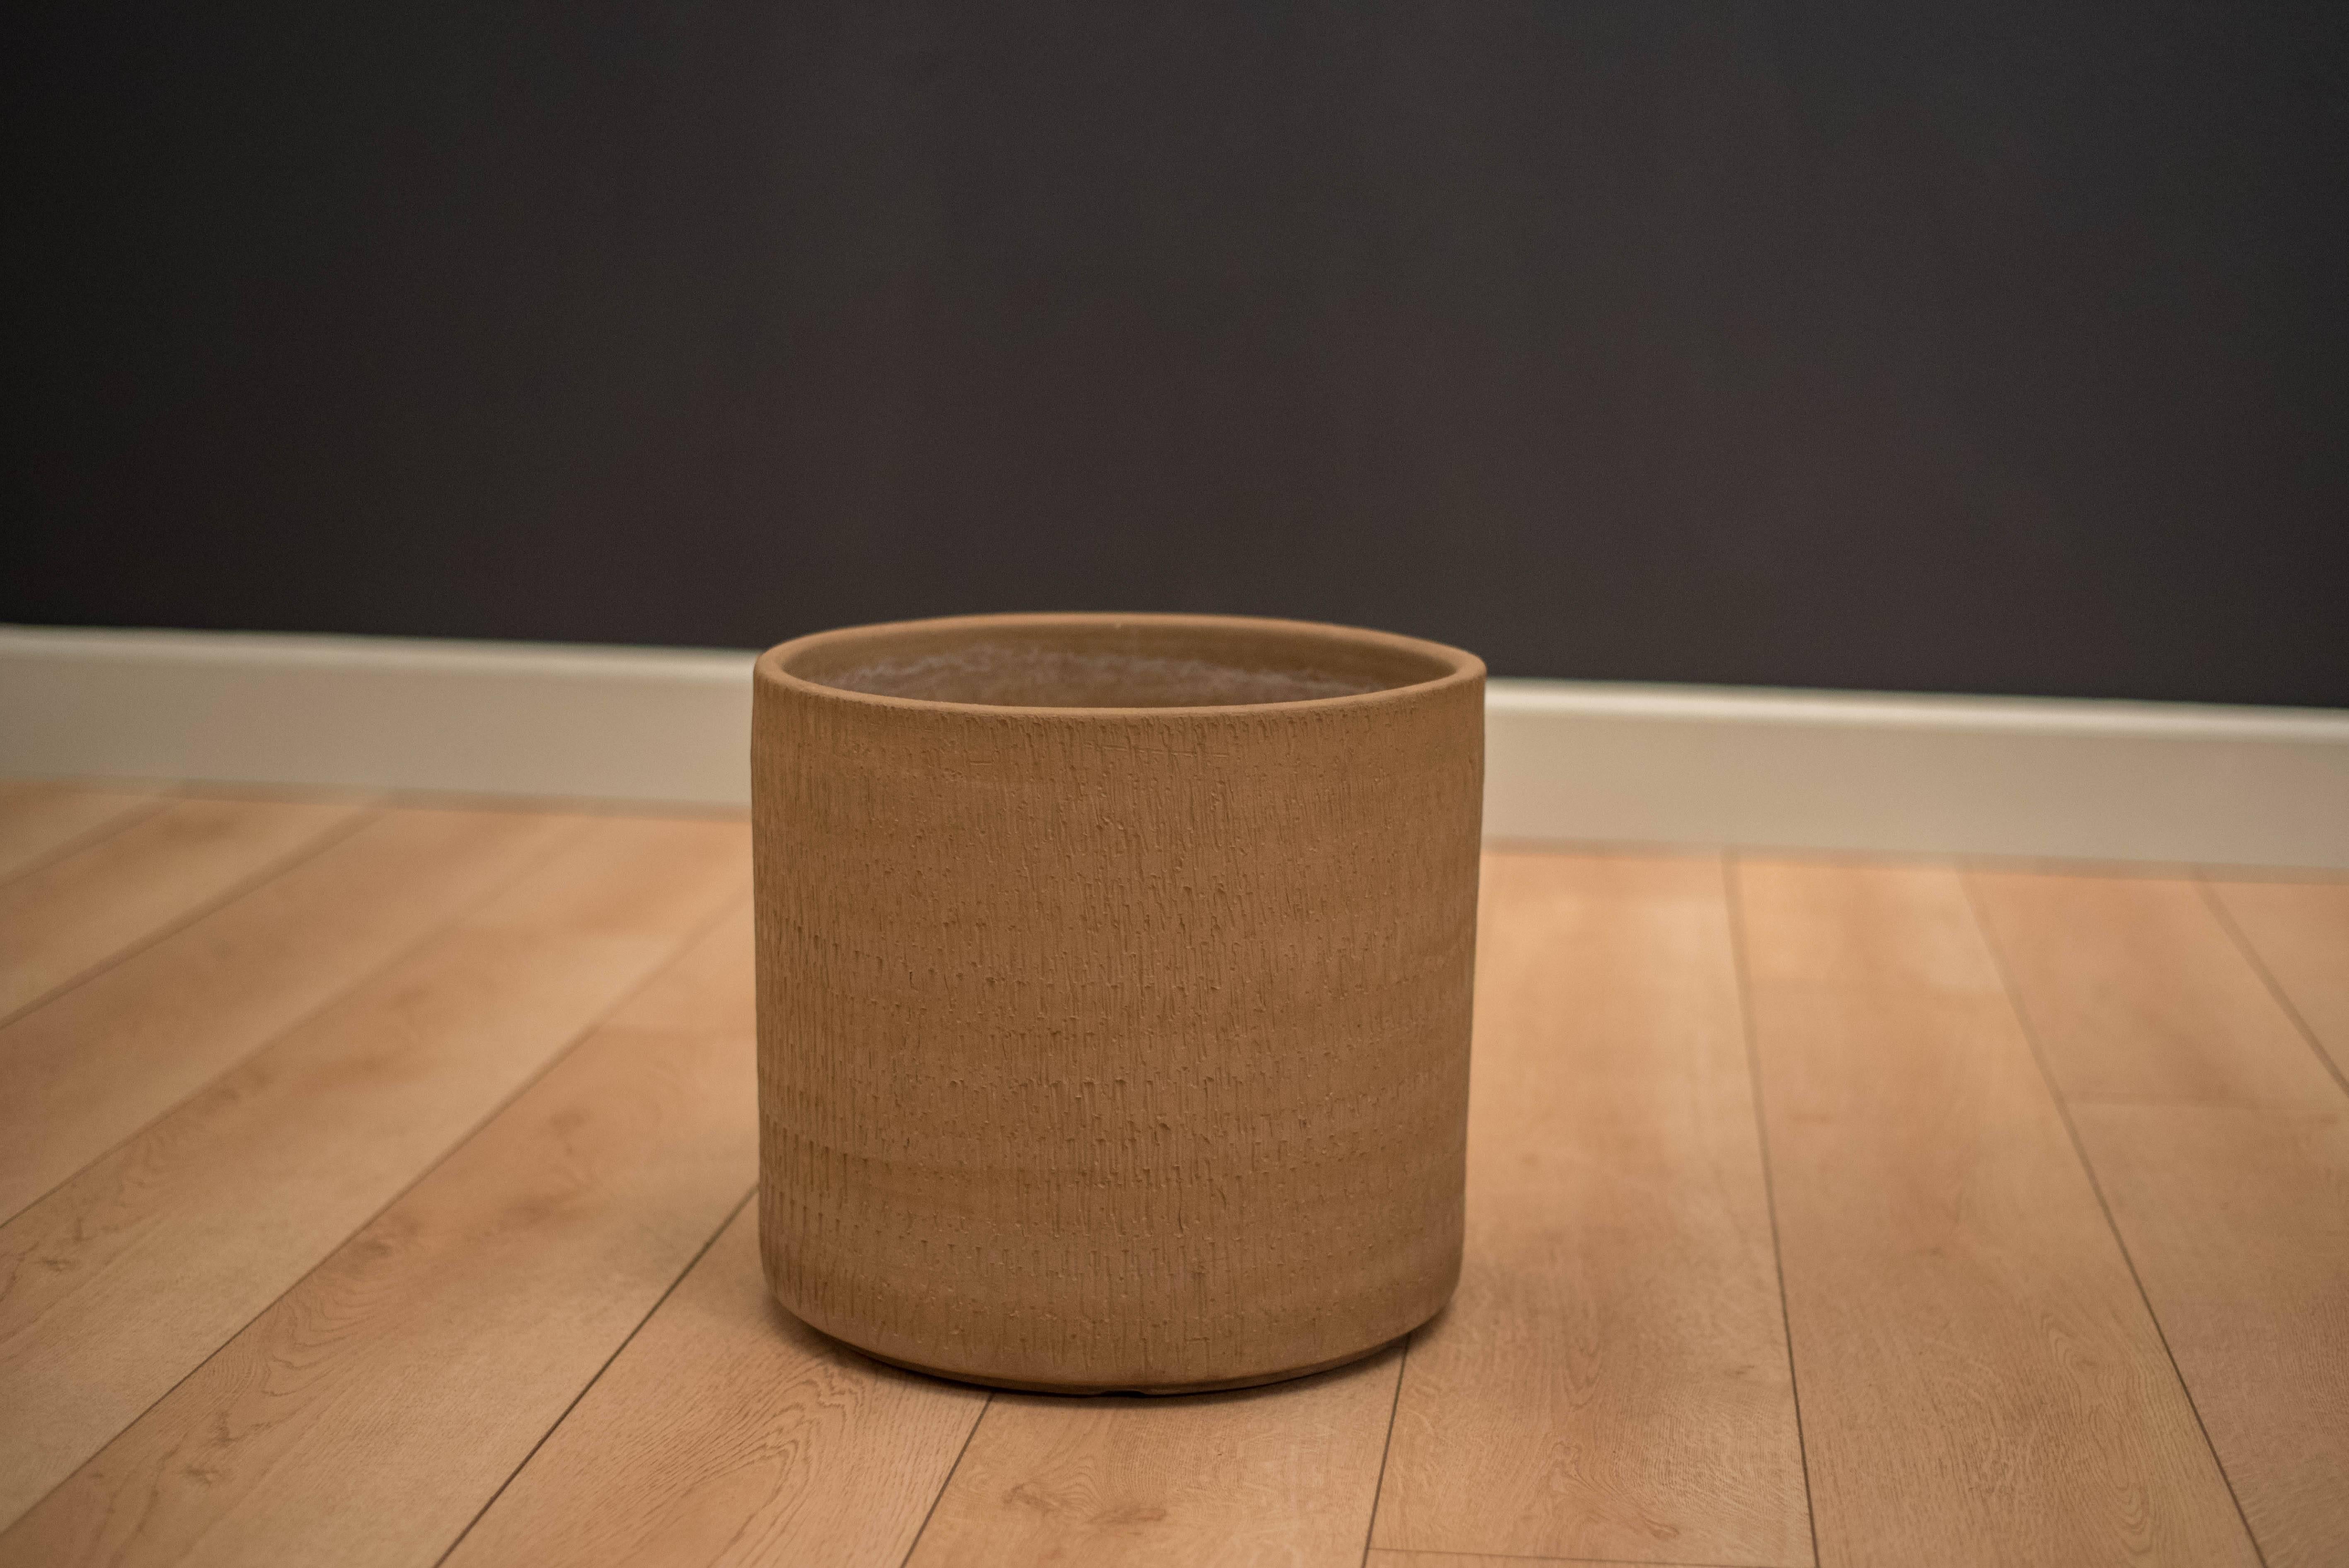 Mid-Century Modern Sgraffito ceramic planter made by Gainey Ceramics. This piece can be used both indoor or outdoor and displays a unique etched design with a neutral matte brown finish.